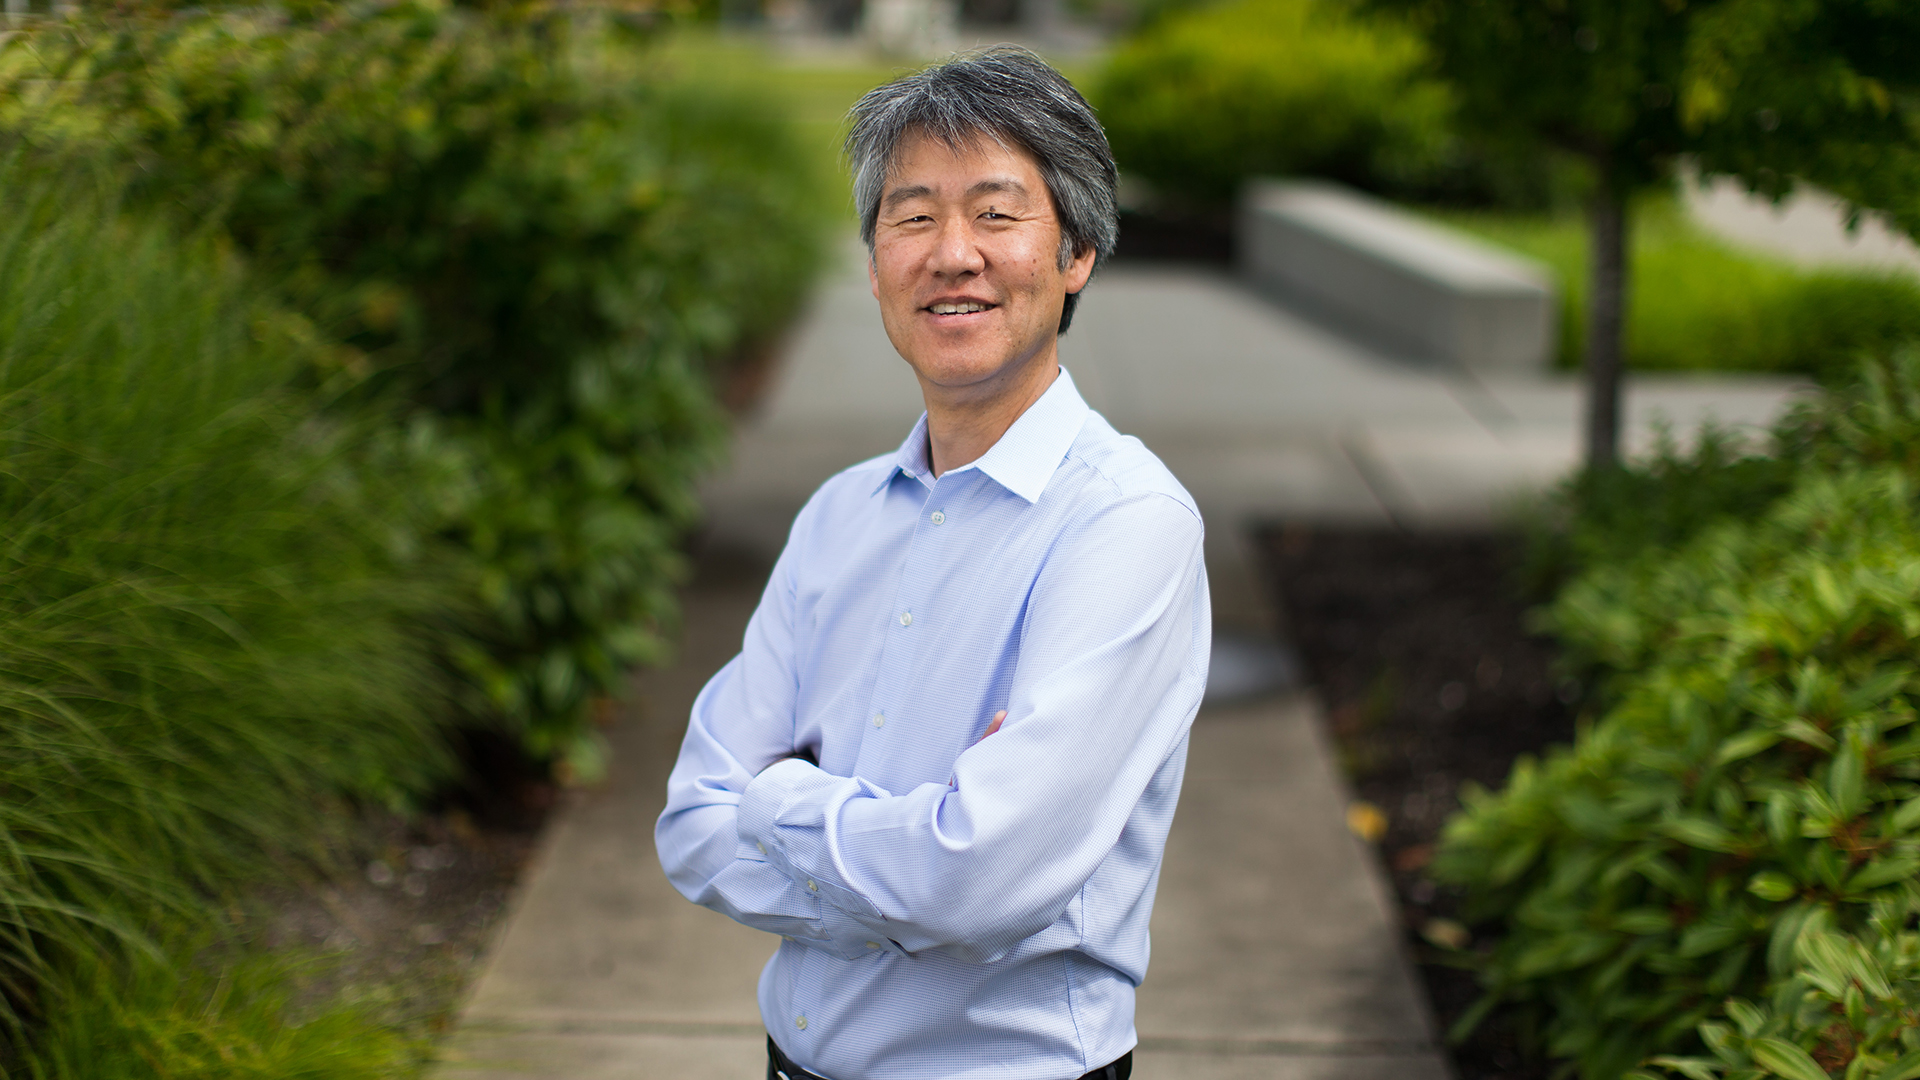 Peter Lee stands with arms crossed on a sidewalk surrounded by greenery